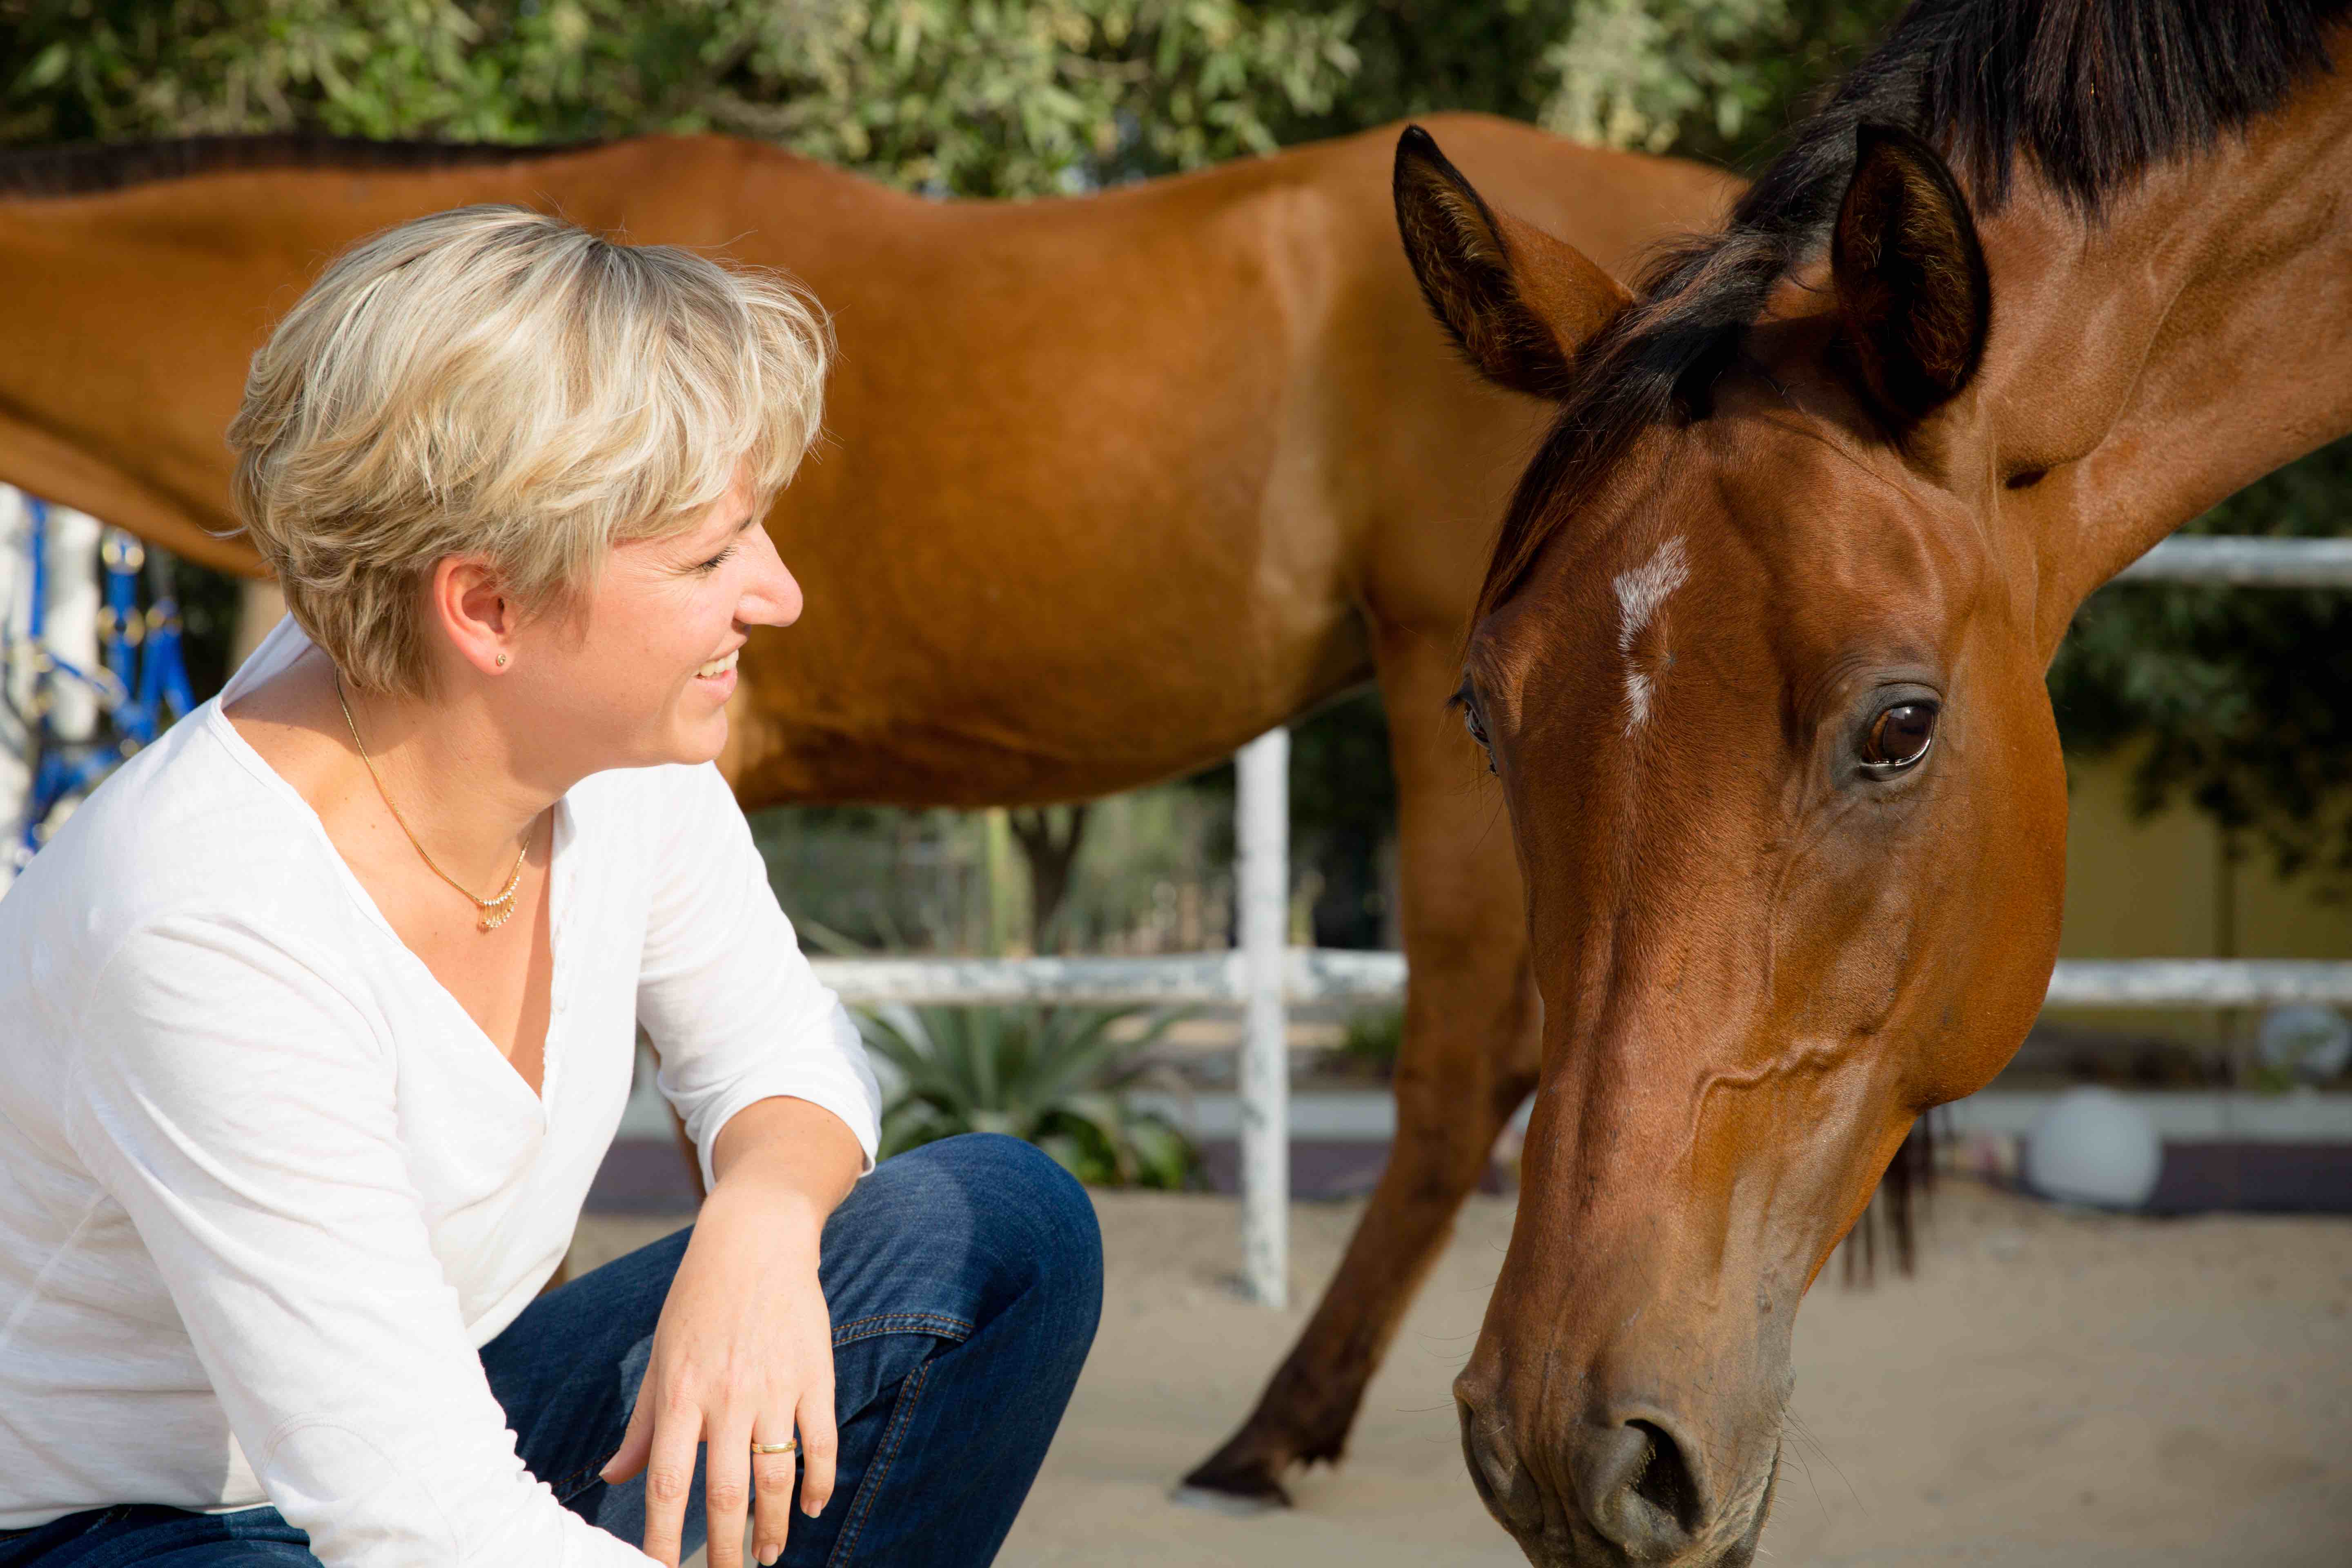 connecting to the horse - horsemanship and just being ourselves! Self development and self esteem